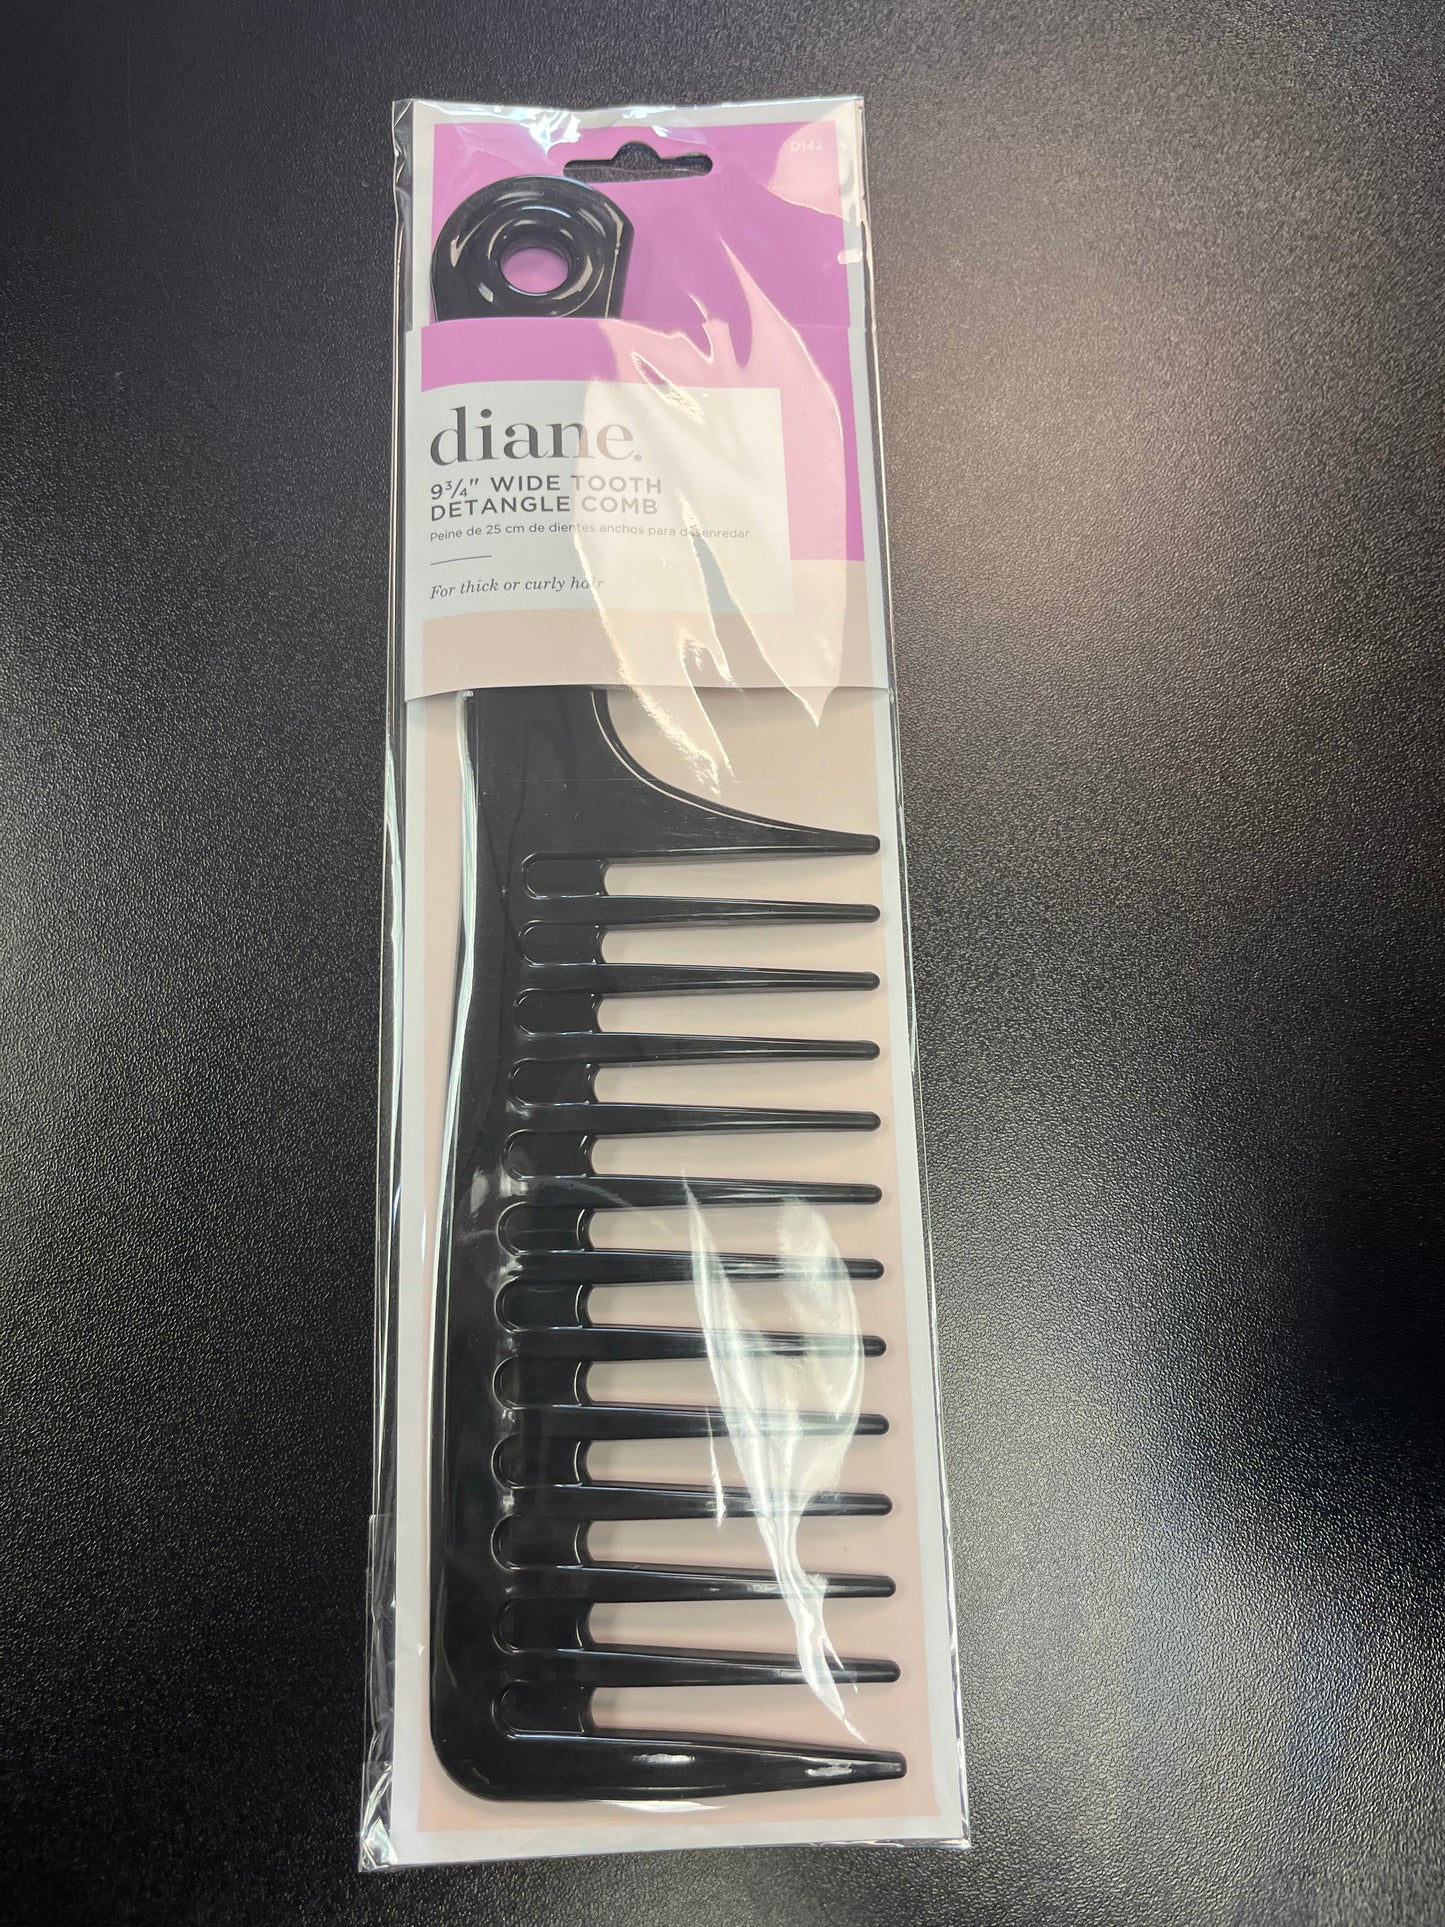 9 3/4" WIDE TOOTH DETANGLE COMB